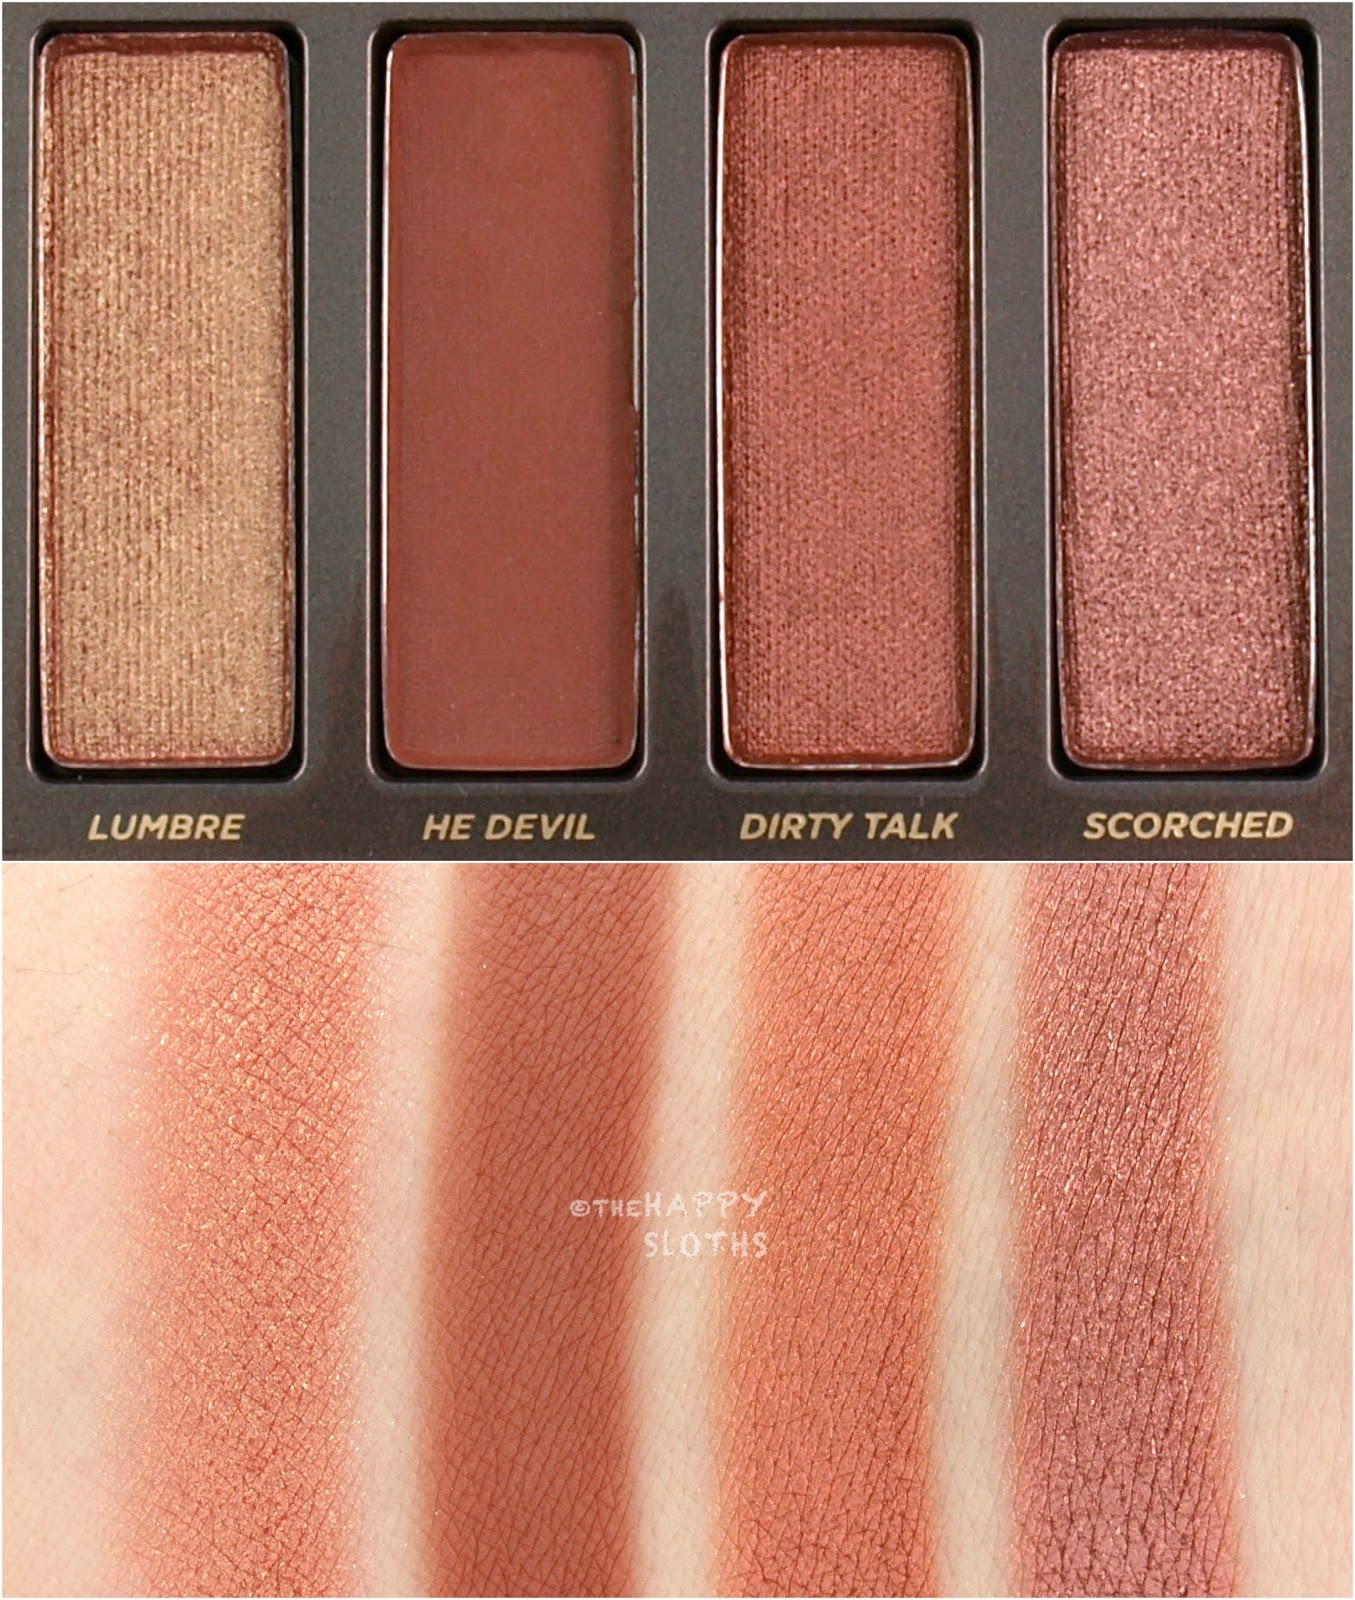 Urban Decay Naked Heat Eyeshadow Palette Swatches and Review